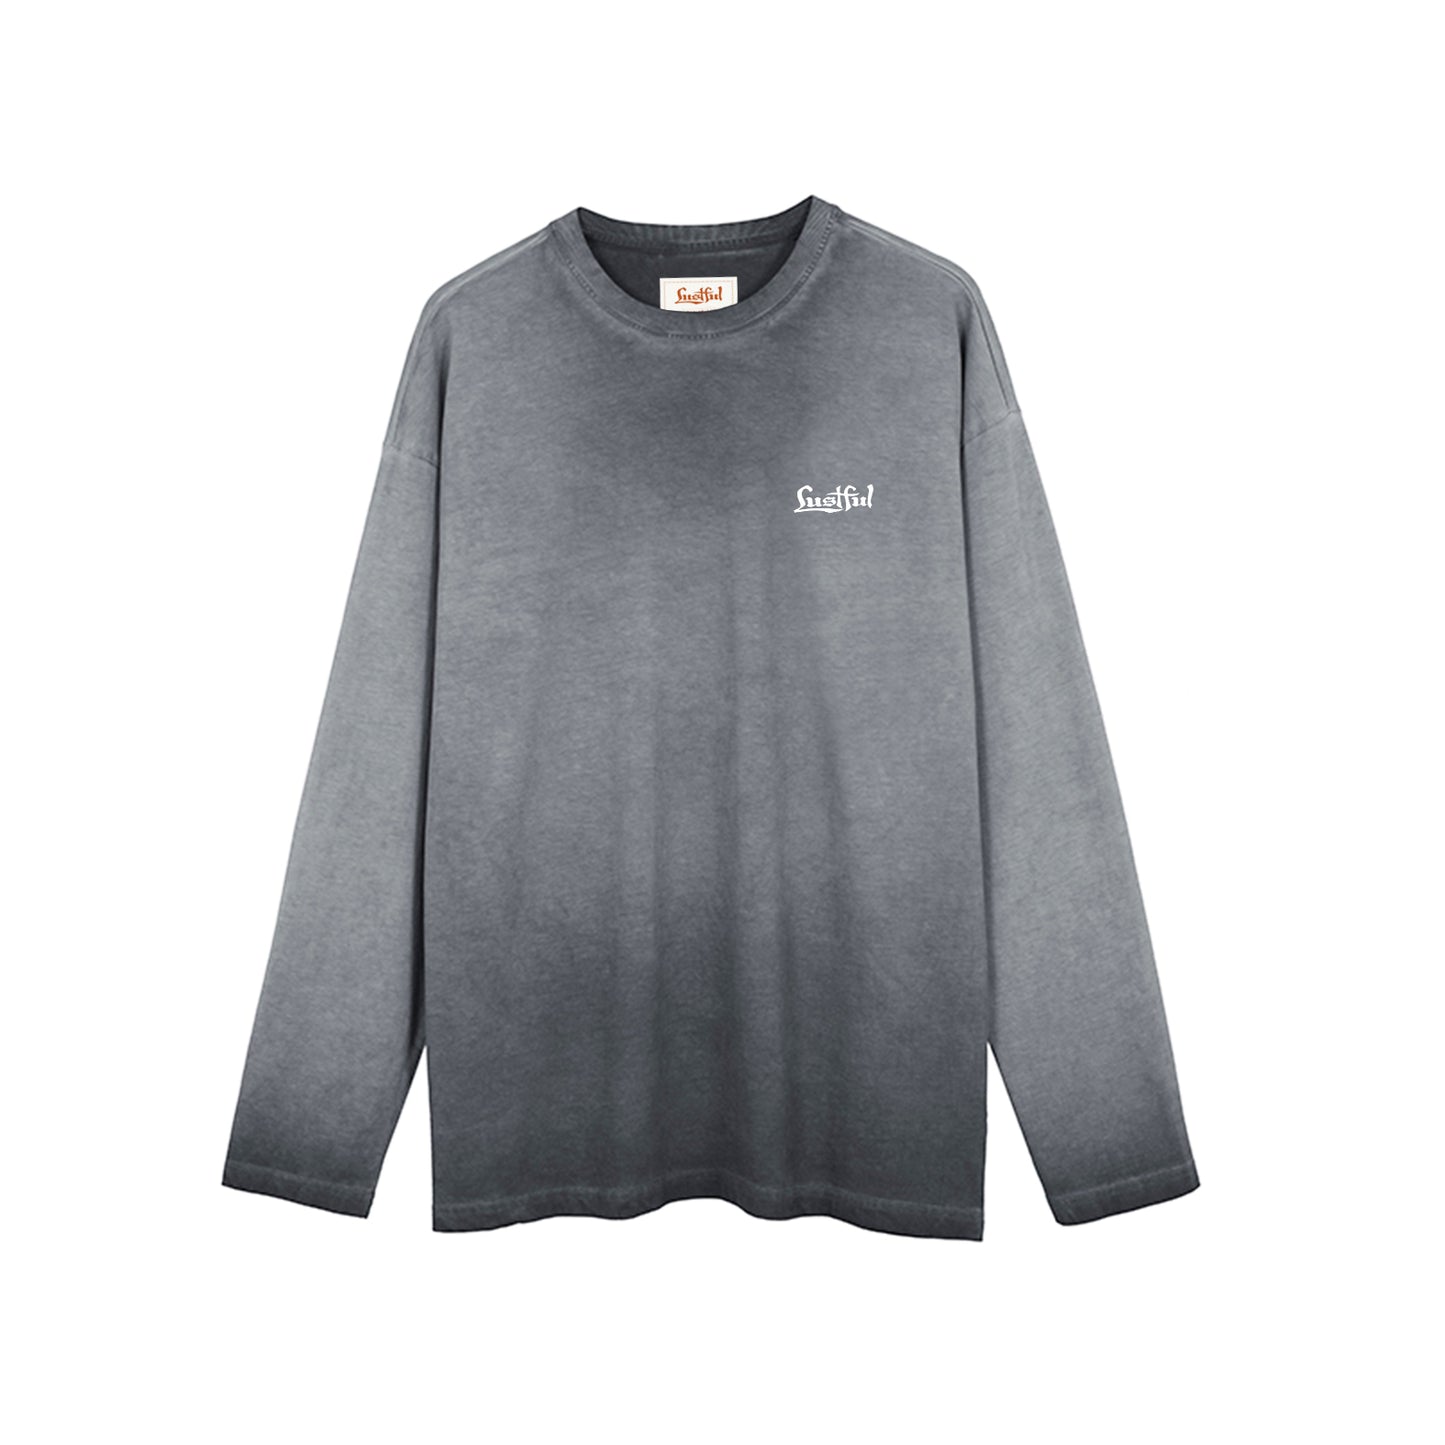 Dirtywashed LS in grey